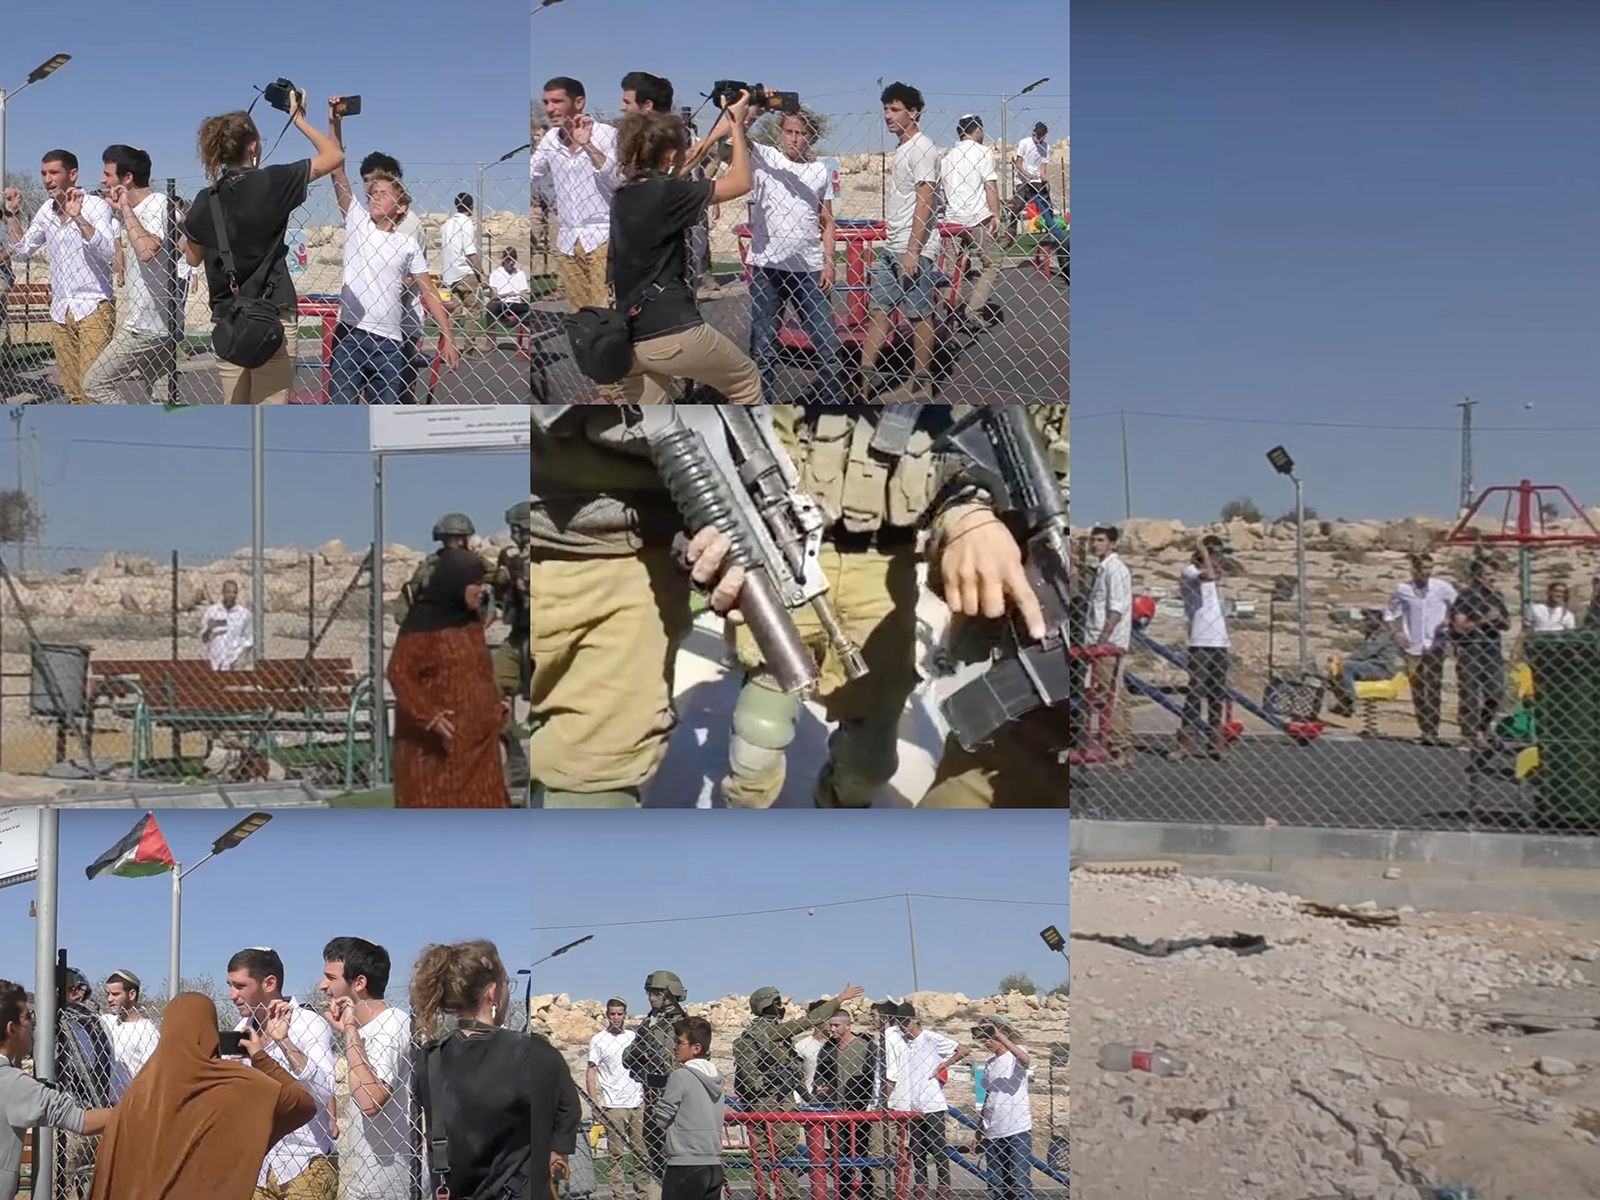 © Edith Geuppert - from a video by the Human Rights Organisation B’Tselem in Susiya